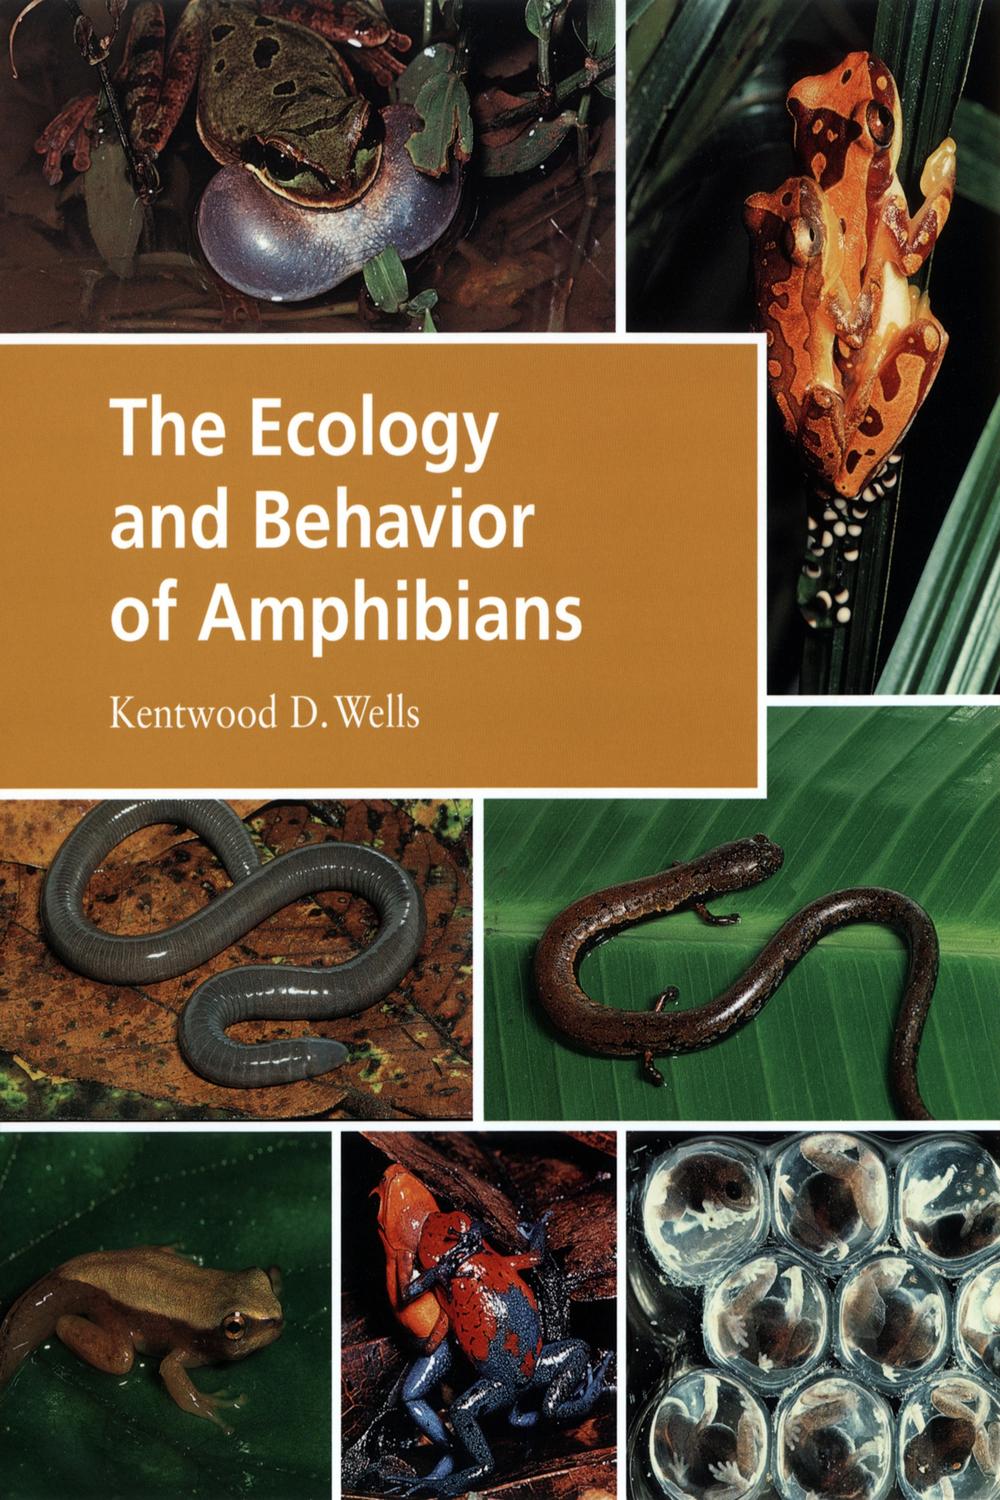 The Ecology and Behavior of Amphibians - Kentwood D. Wells